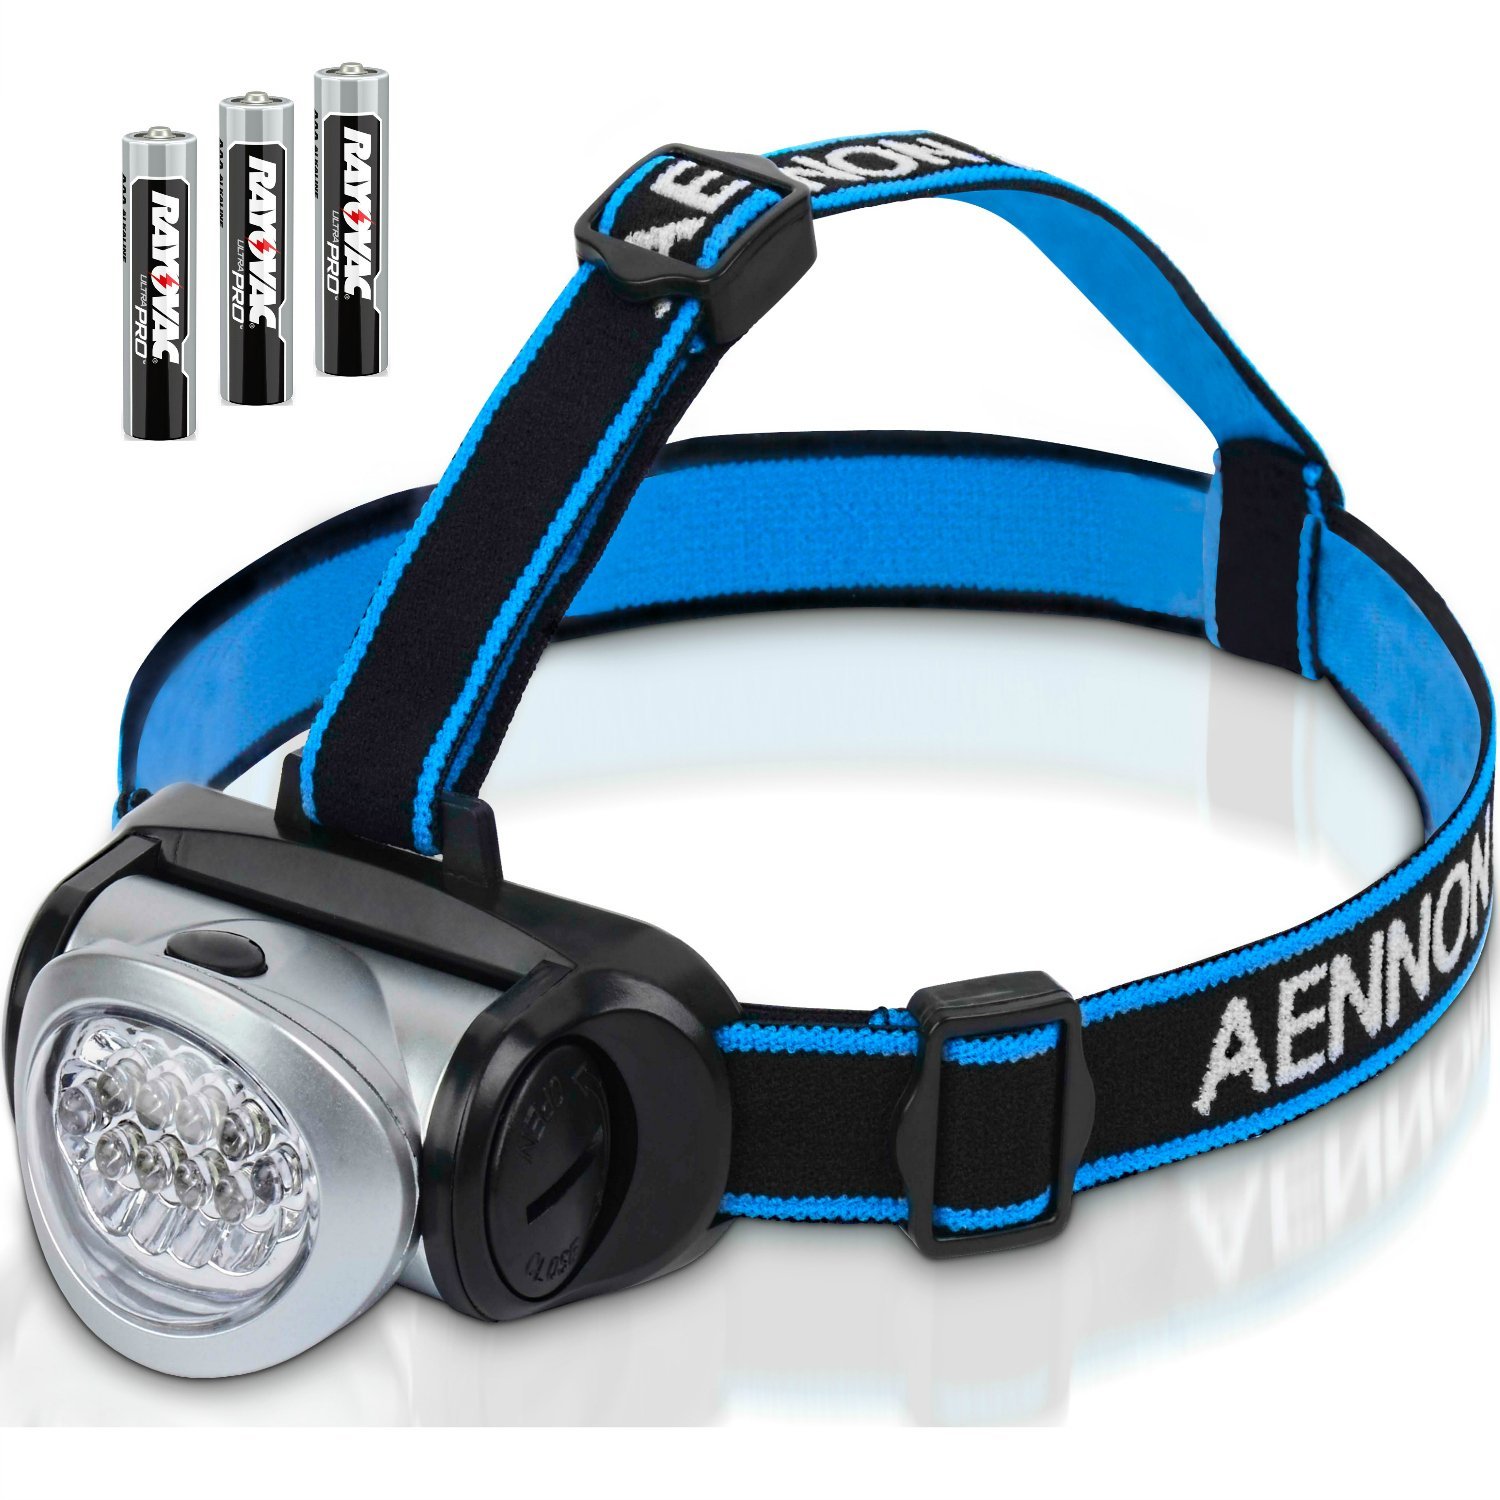 Amazon.com : LED Headlamp Flashlight with Red Lights for Running ...